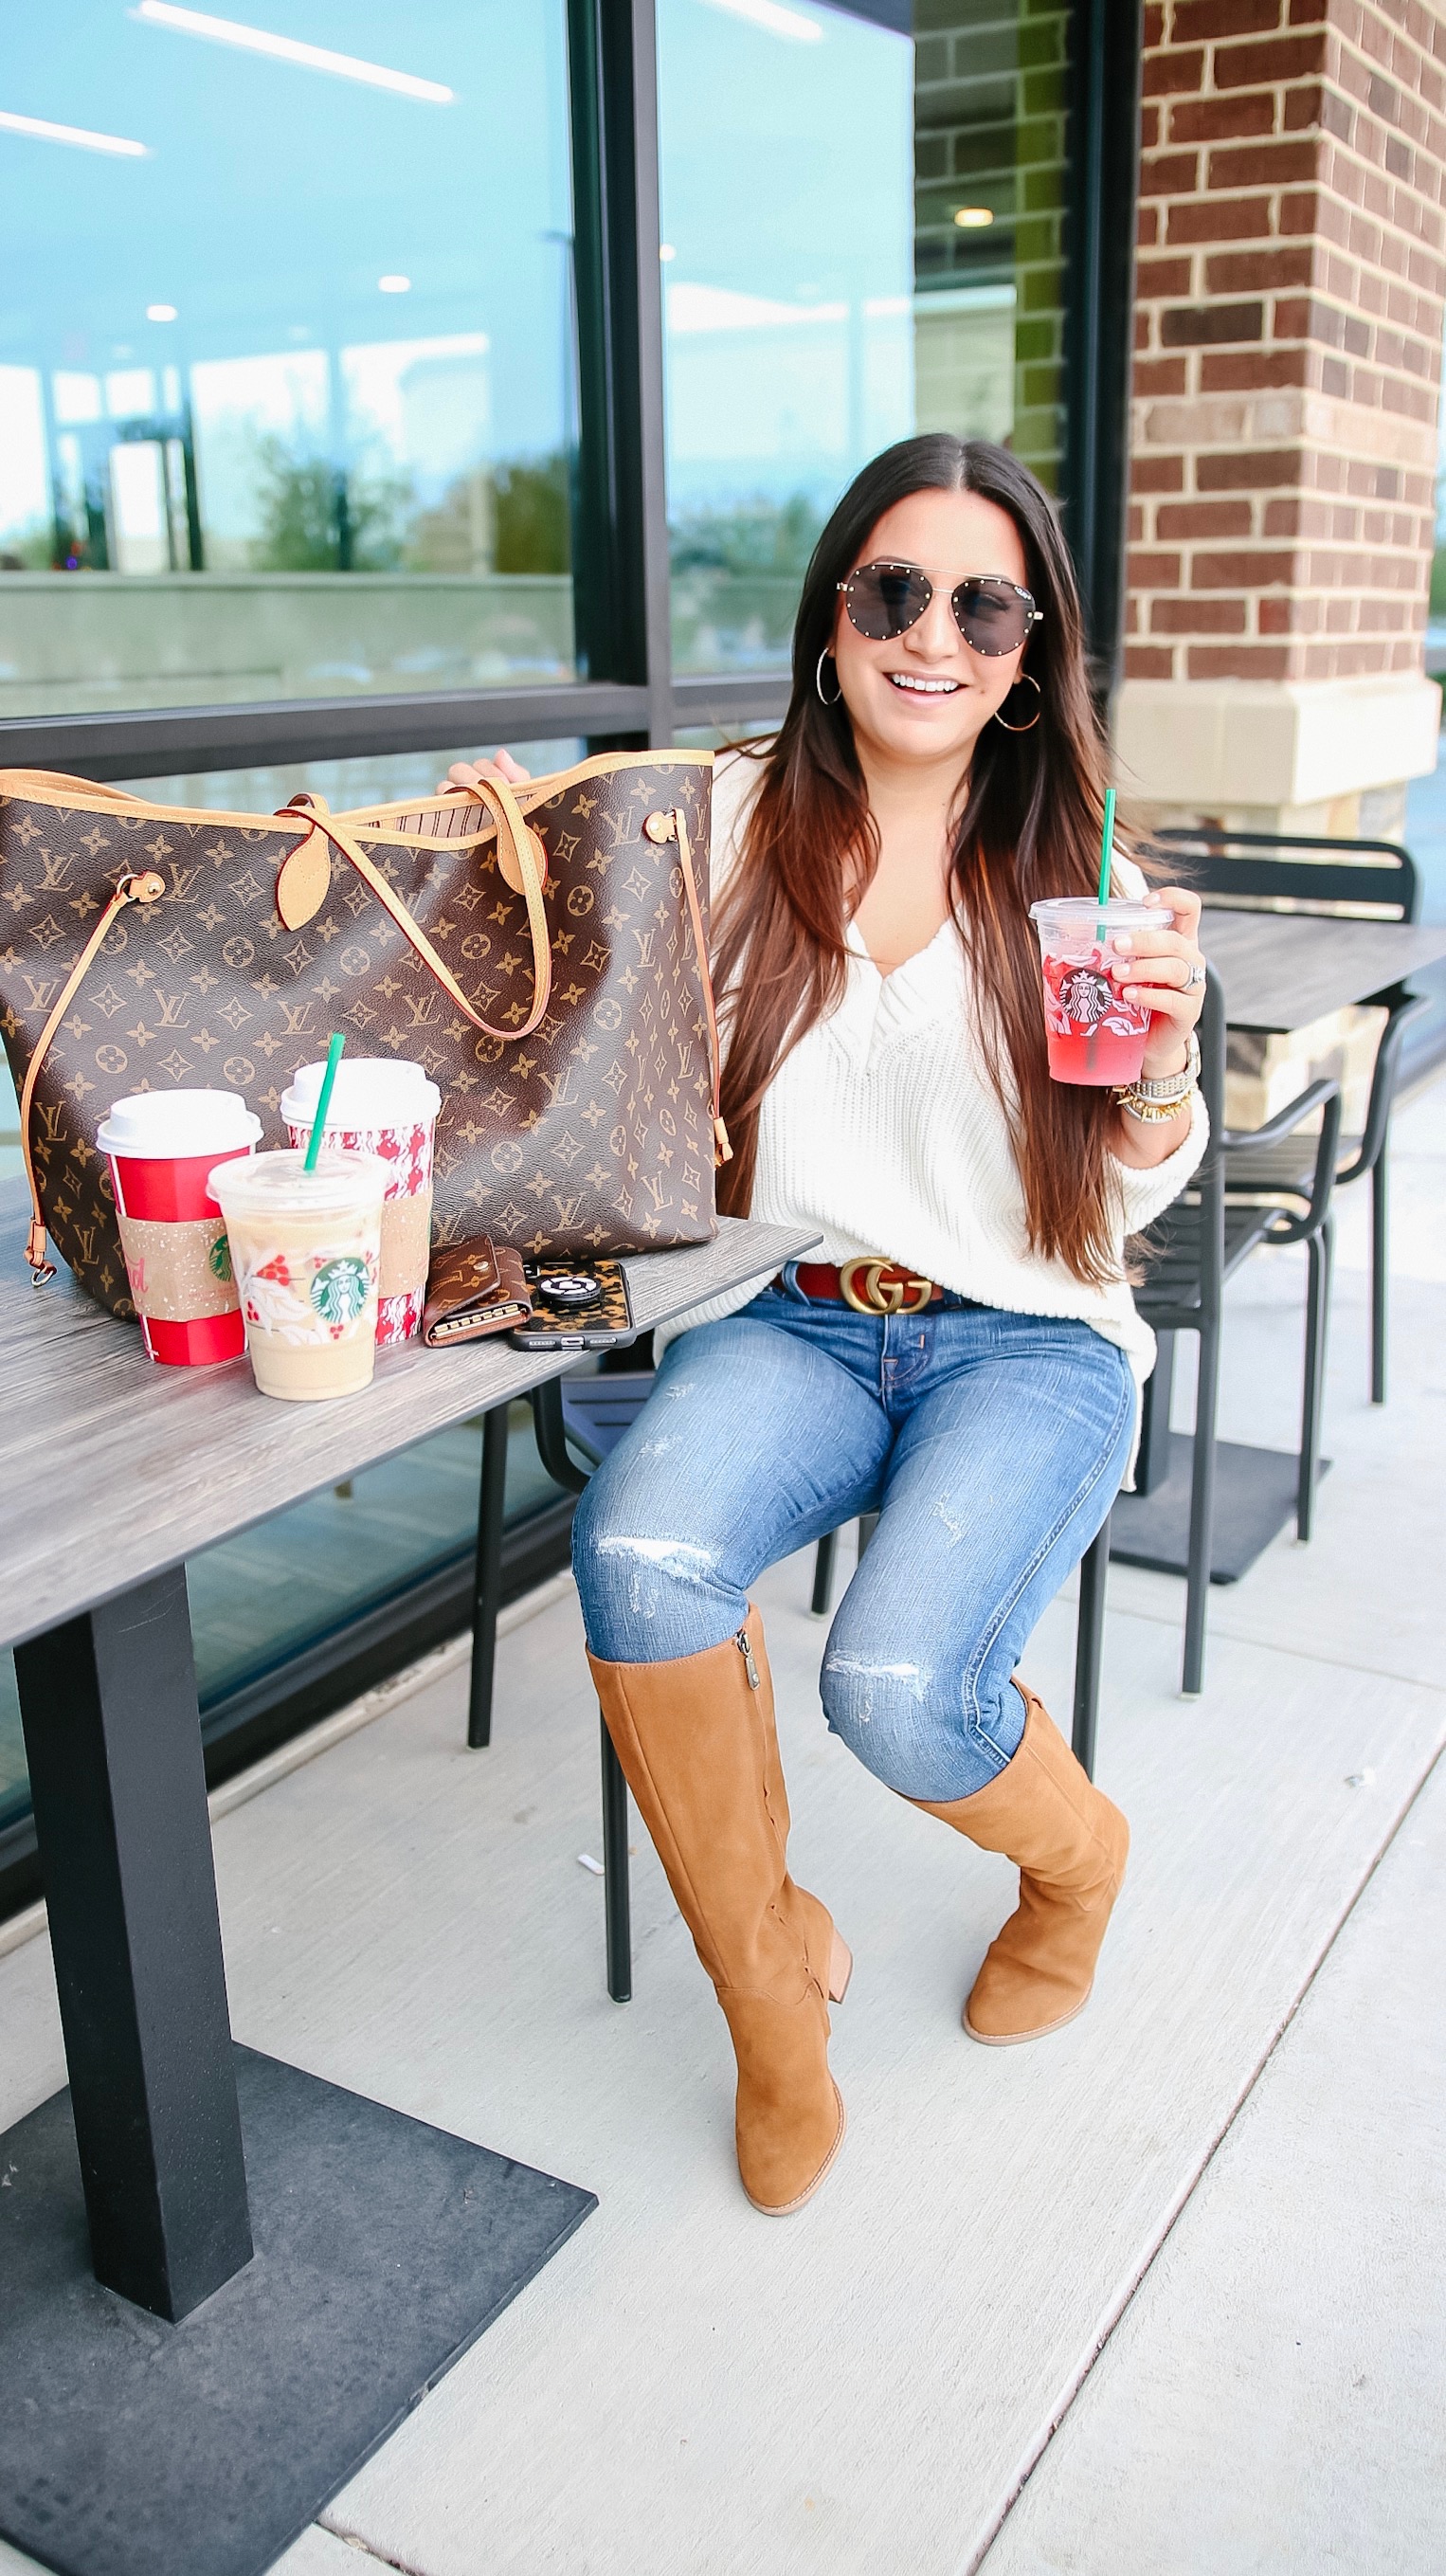 Louis Vuitton Neverfull and Starbucks-- a perfect combination